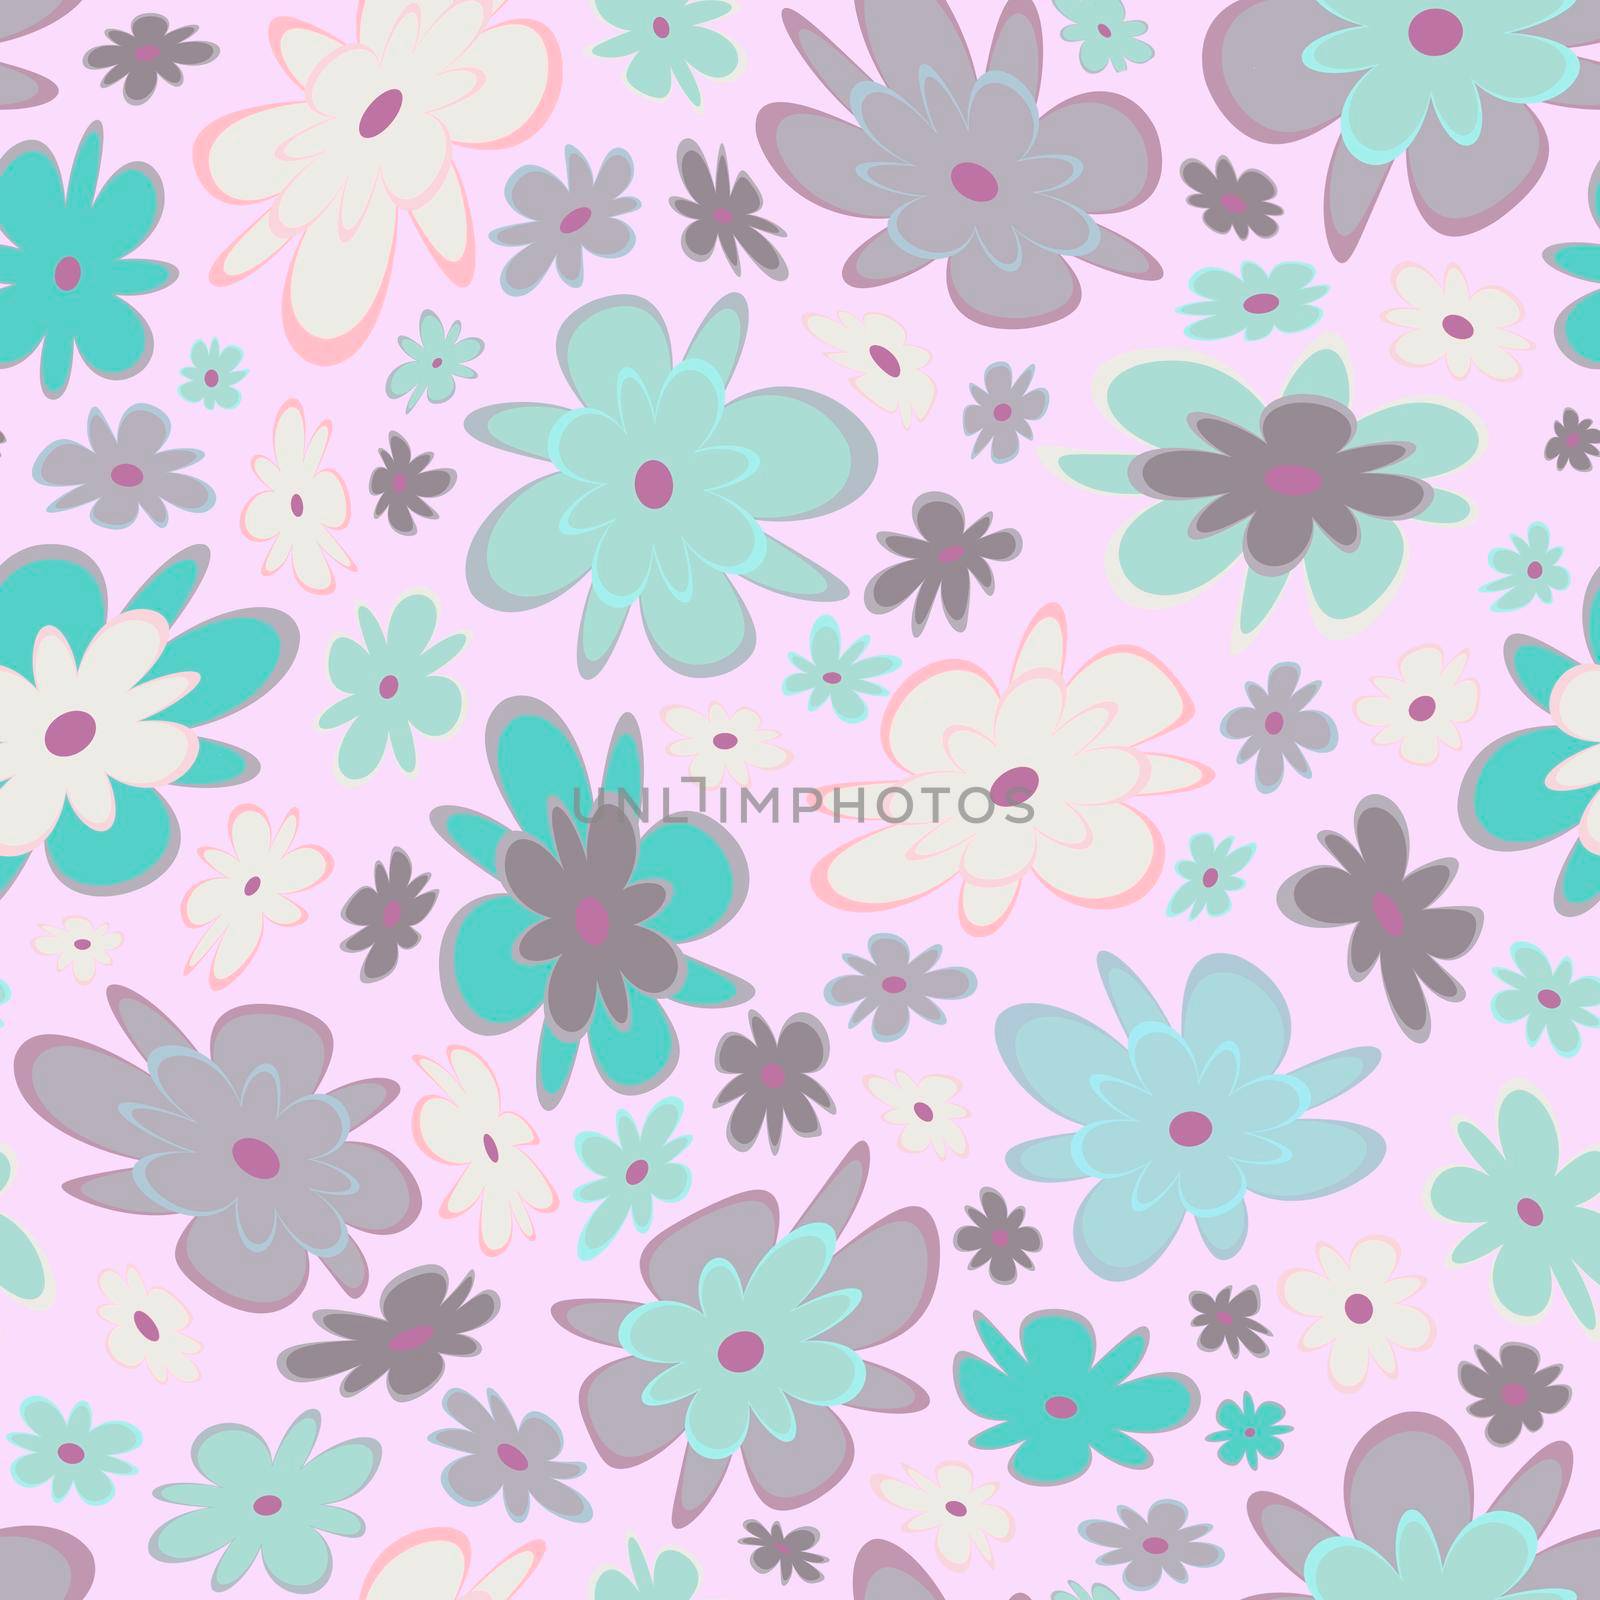 Trendy fabric pattern with miniature flowers.Summer print.Fashion design.Motifs scattered random.Elegant template for fashion prints.Good for fashion,textile,fabric,gift wrapping paper.Pastel shades by Angelsmoon